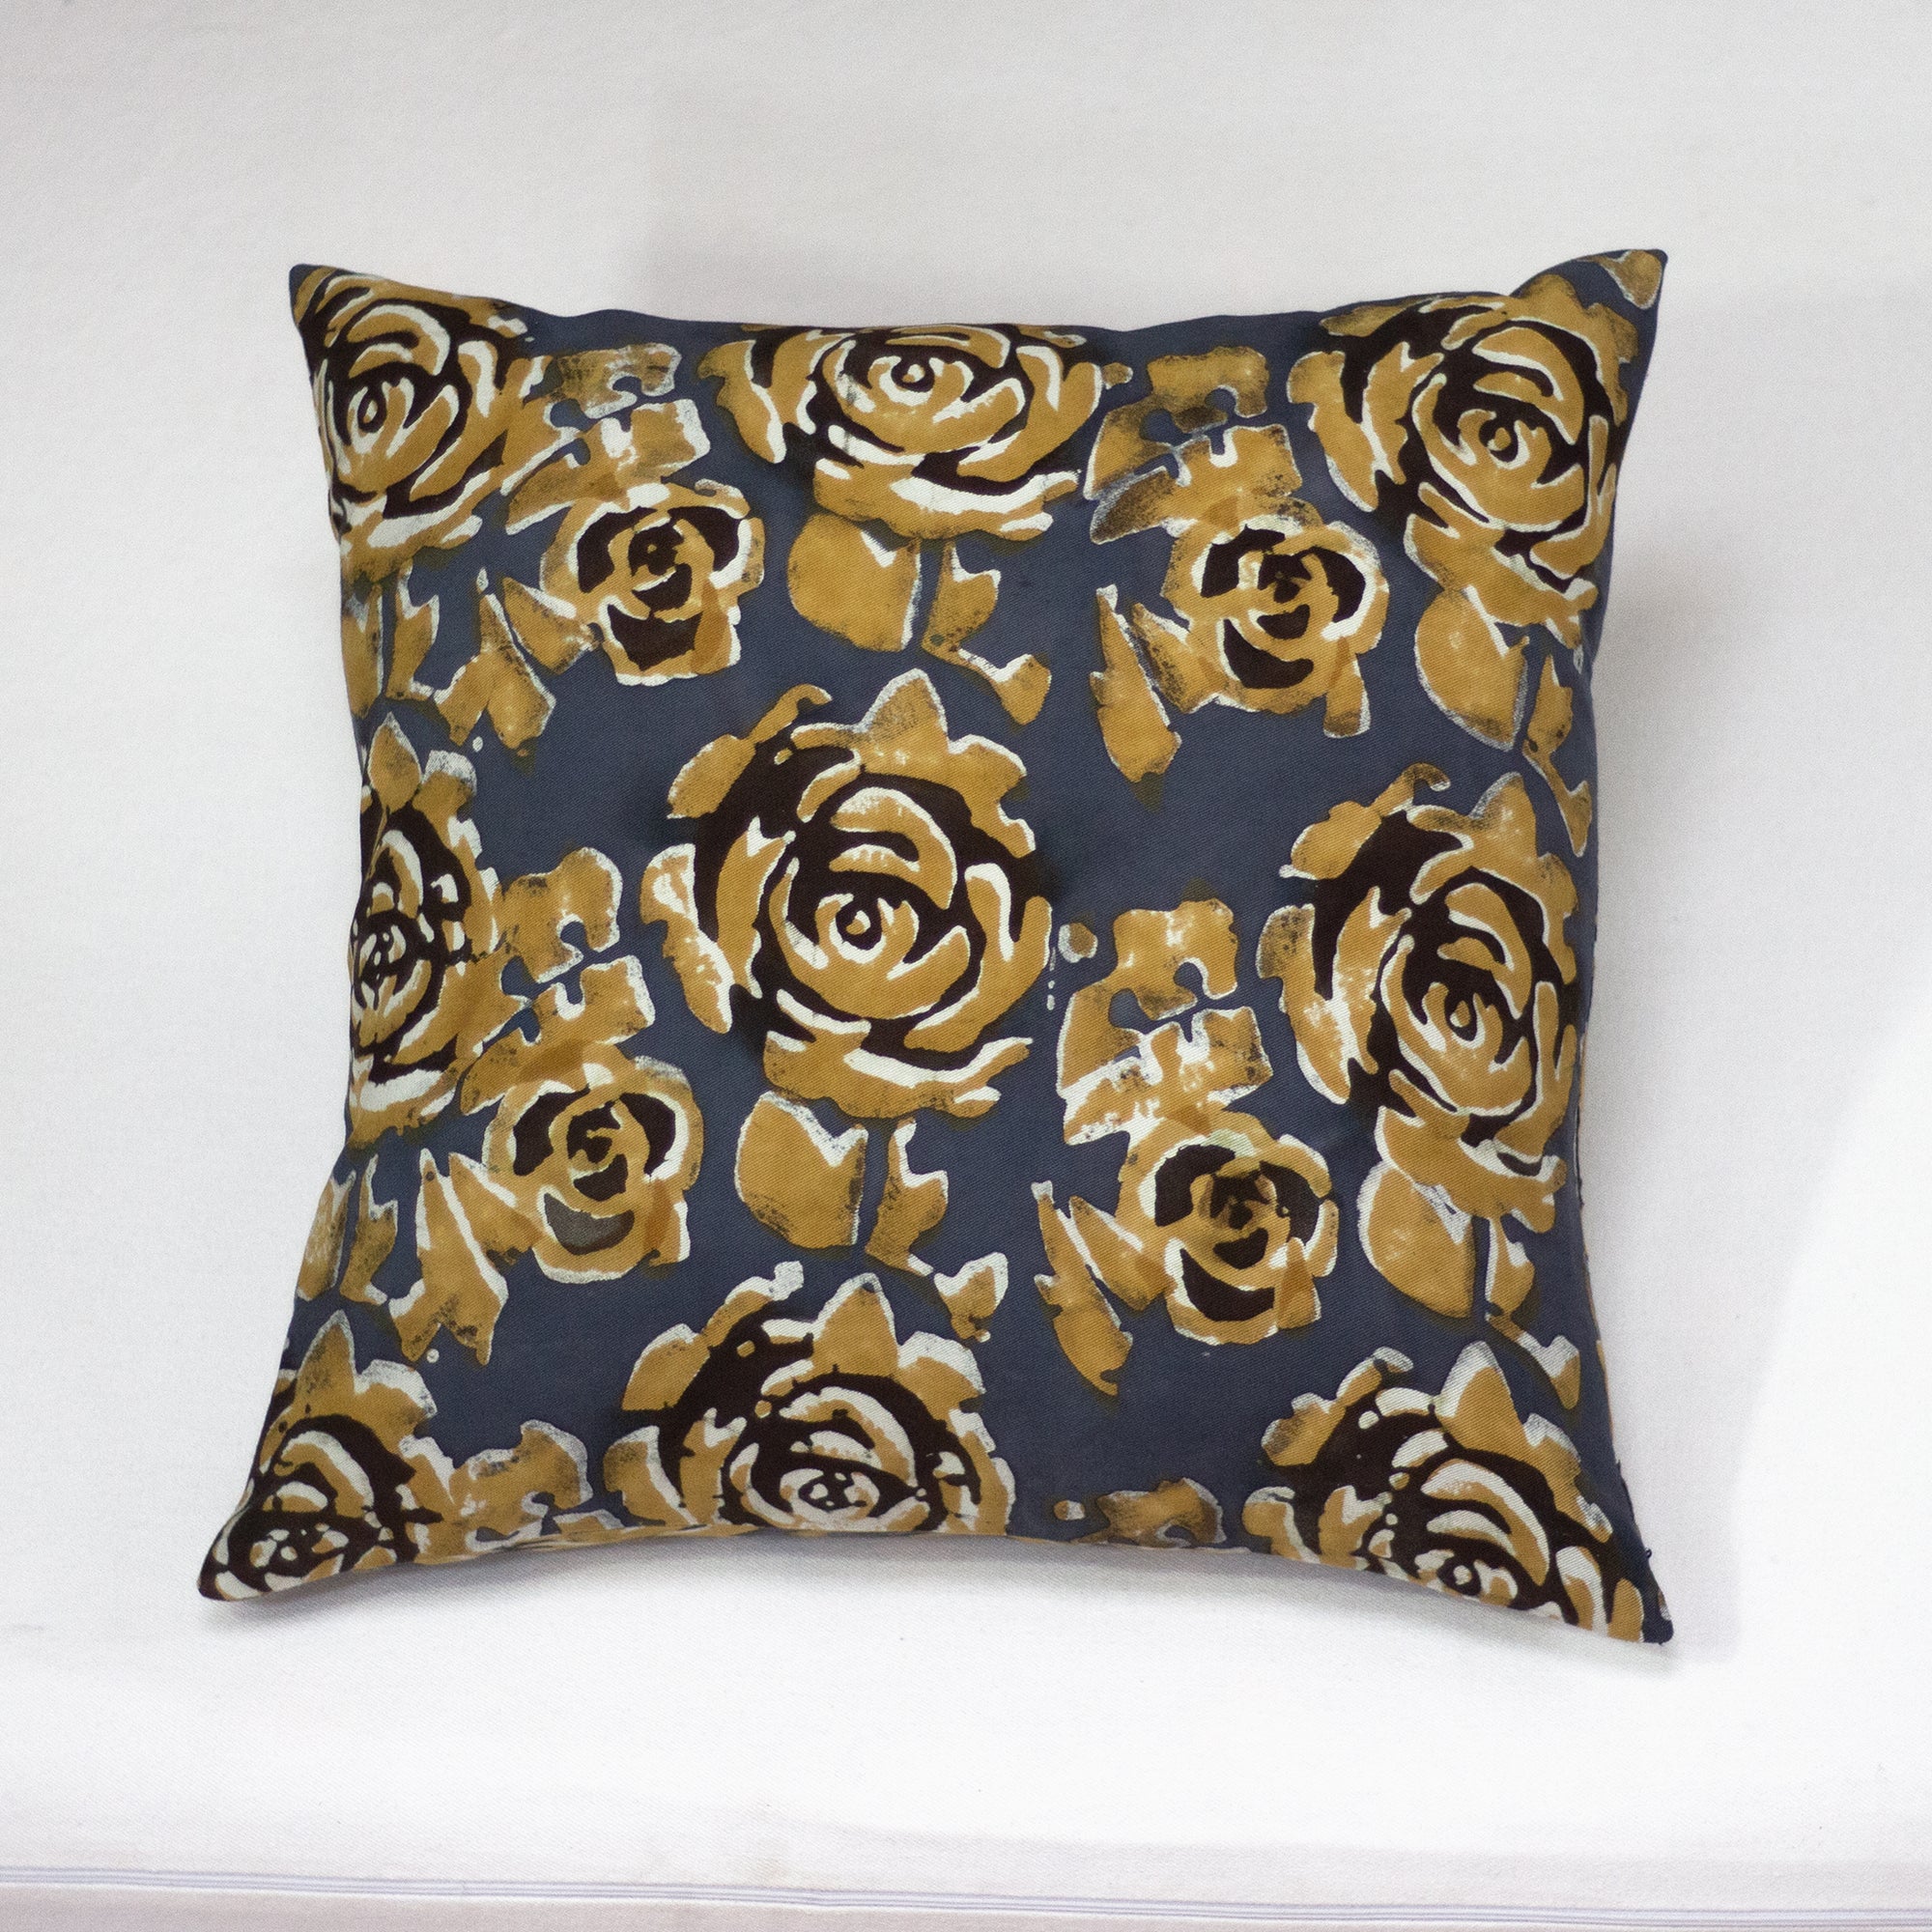 Hand Painted Accent Pillow Cover - Pewter Bronze